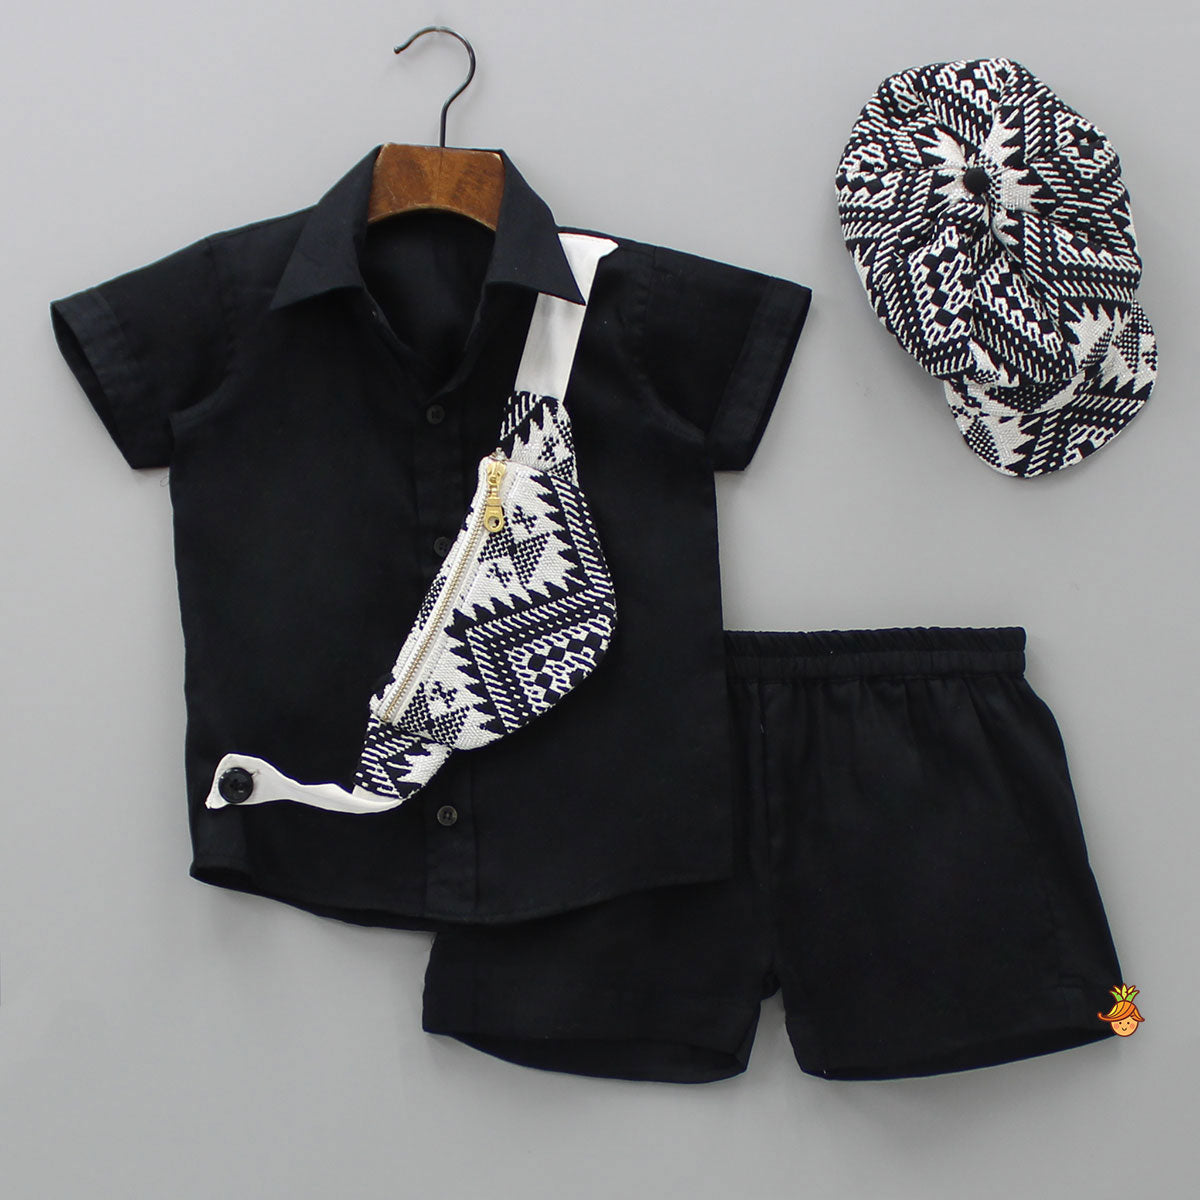 Black Shirt And Shorts With Attached Bag And Matching Cap